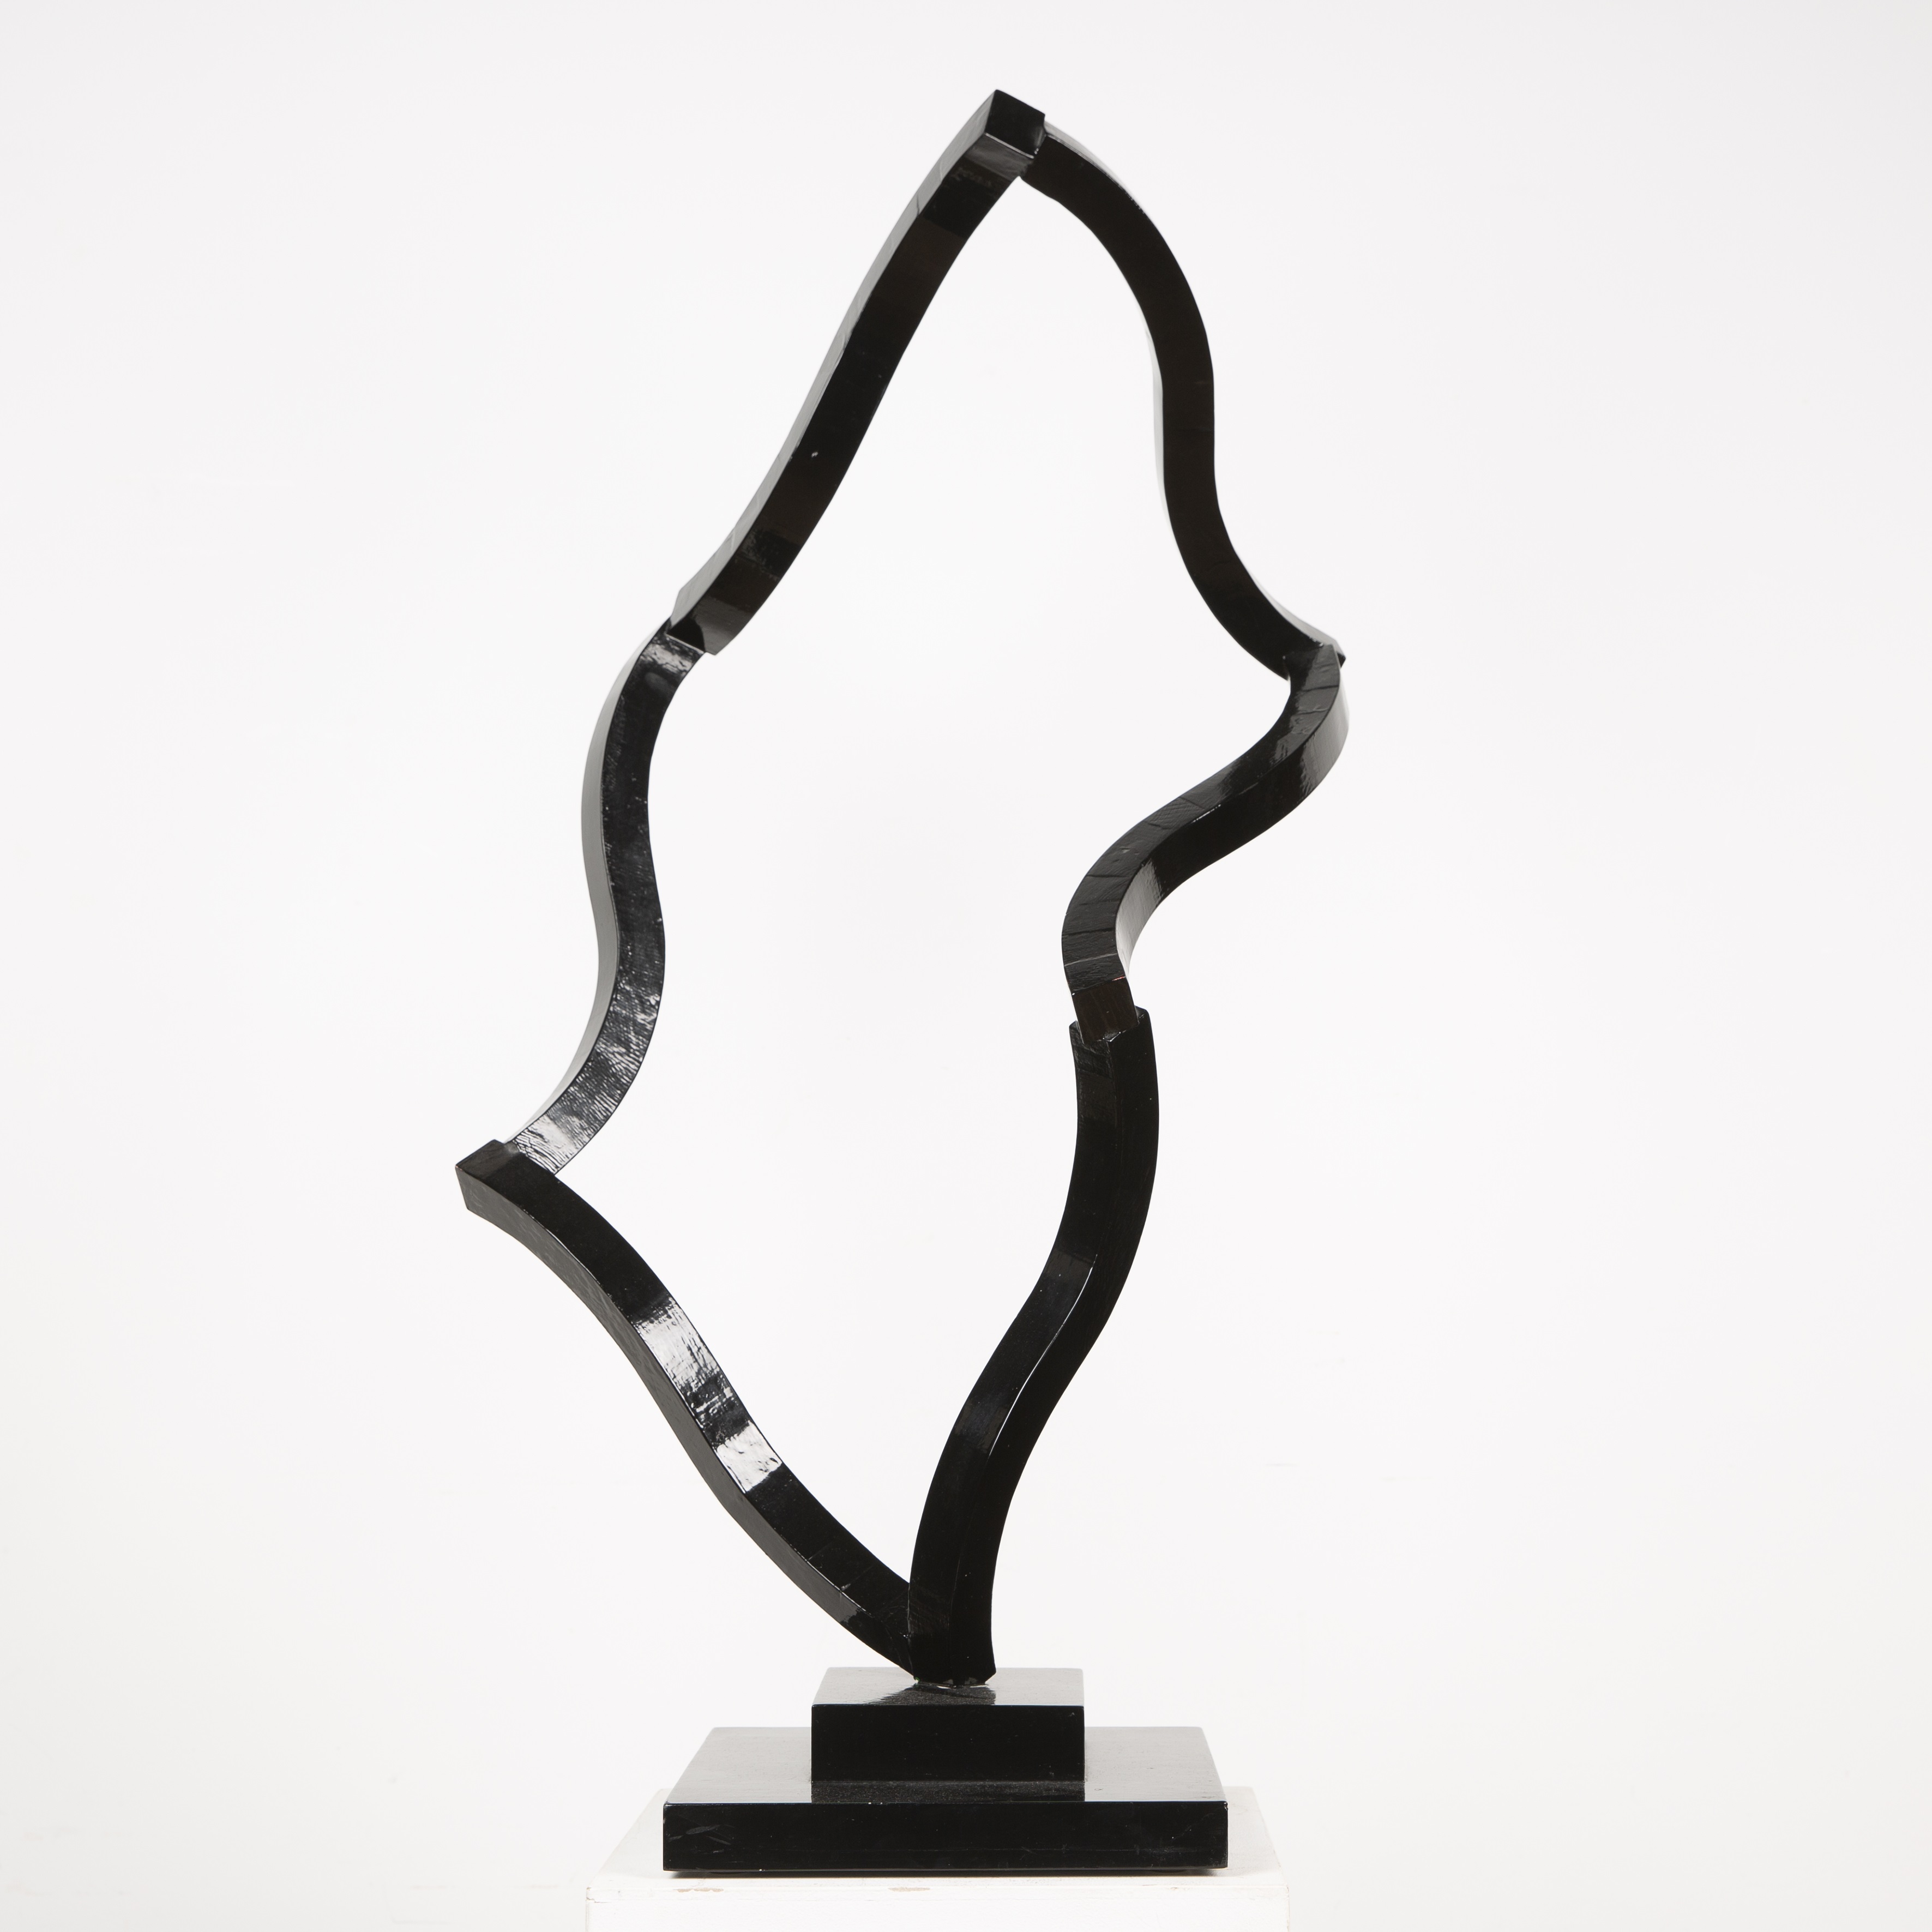 David Sawyer (20th Century) 'Silhouette', painted wooden abstract sculpture, 96cm high x 49cm - Image 3 of 4